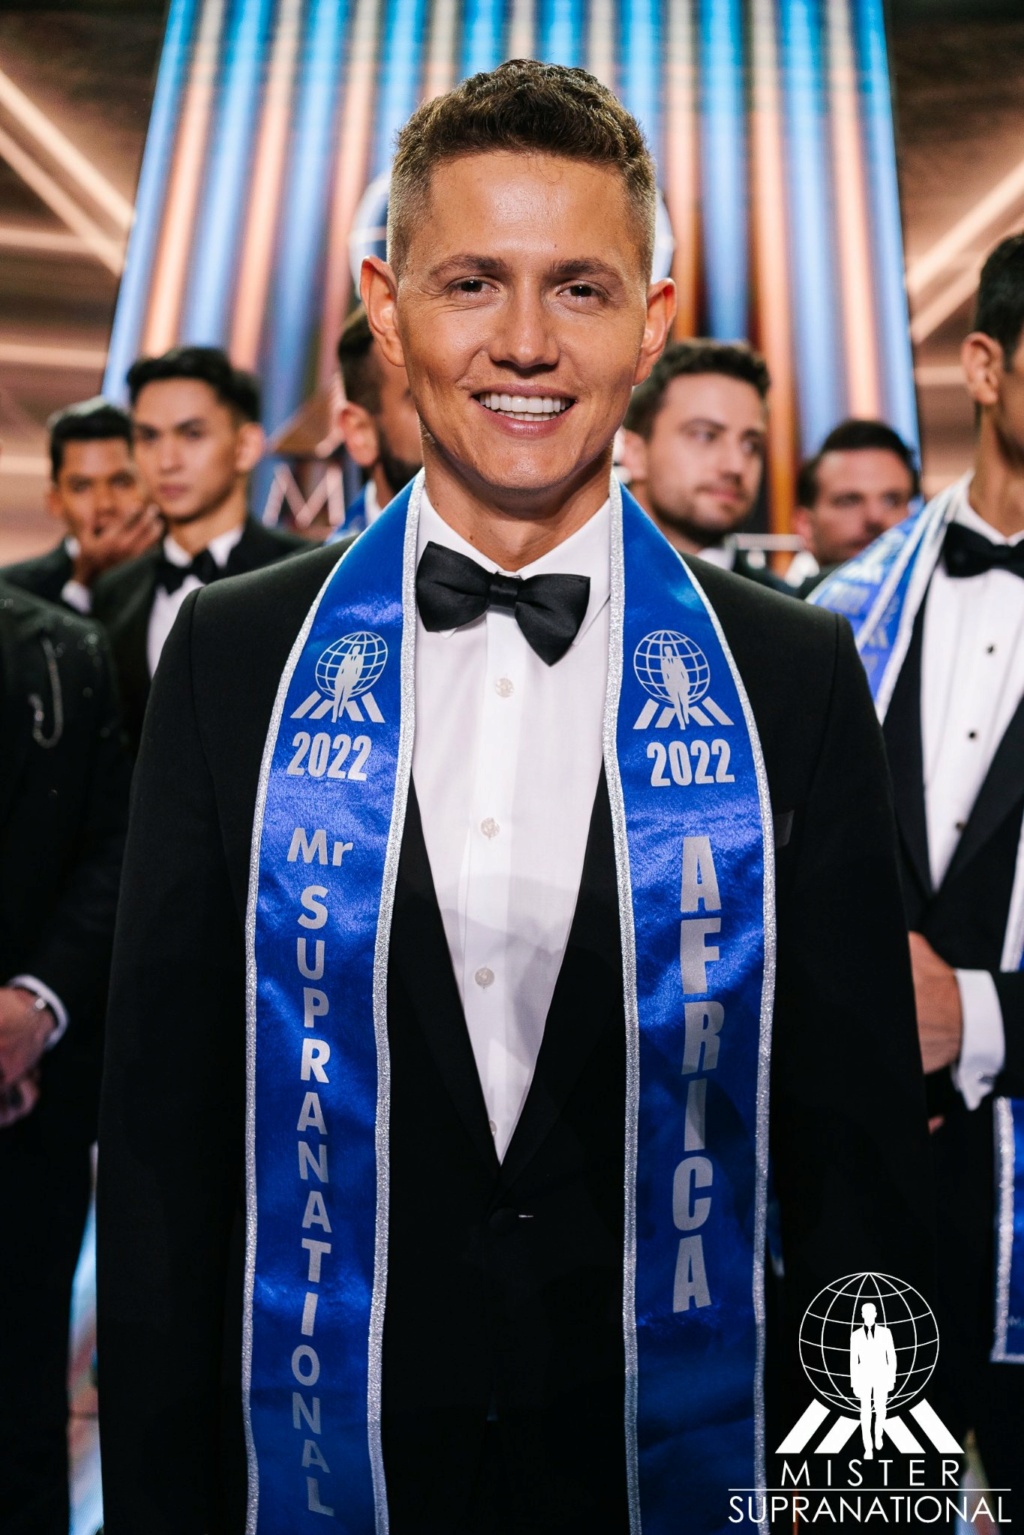 ⚛️⚛️⚛️⚛️⚛️ MISTER SUPRANATIONAL IN HISTORY ⚛️⚛️⚛️⚛️⚛️ 29391010